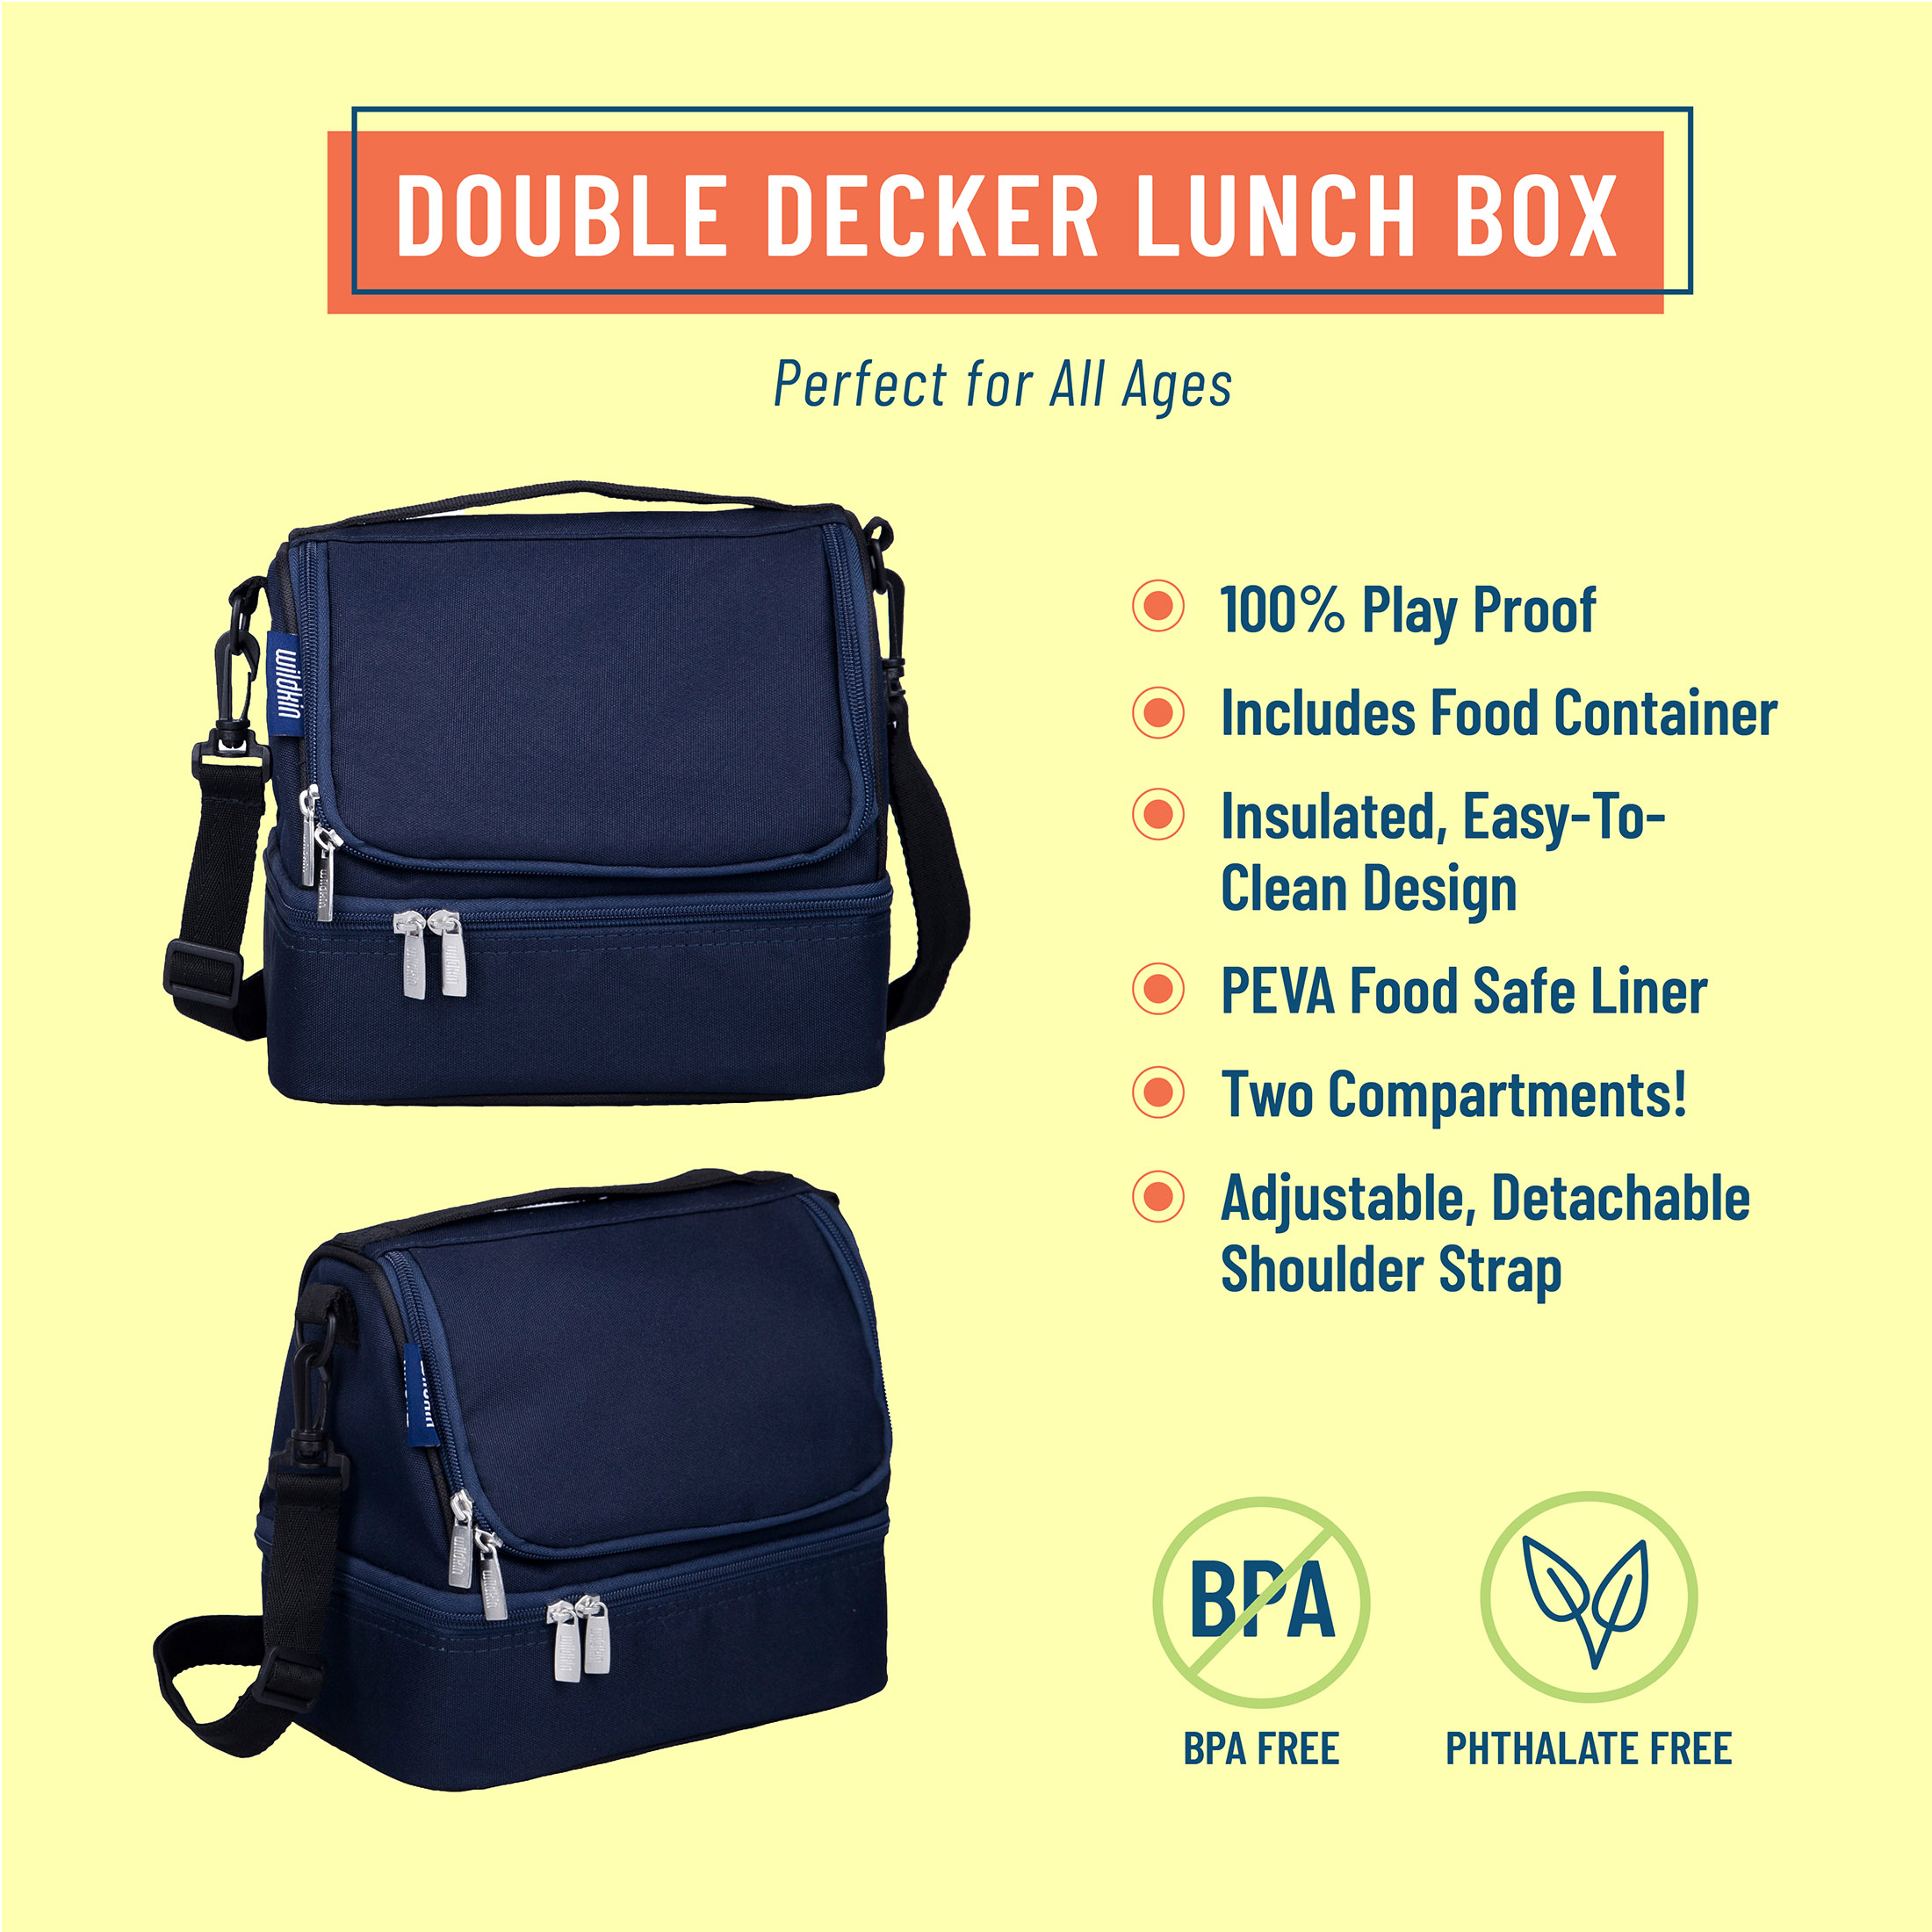 Wildkin Two Compartment Insulated Reusable Kids Lunch Bag for Boys & Girls, BPA Free, Includes Shoulder Strap (Whale Blue) - image 3 of 7